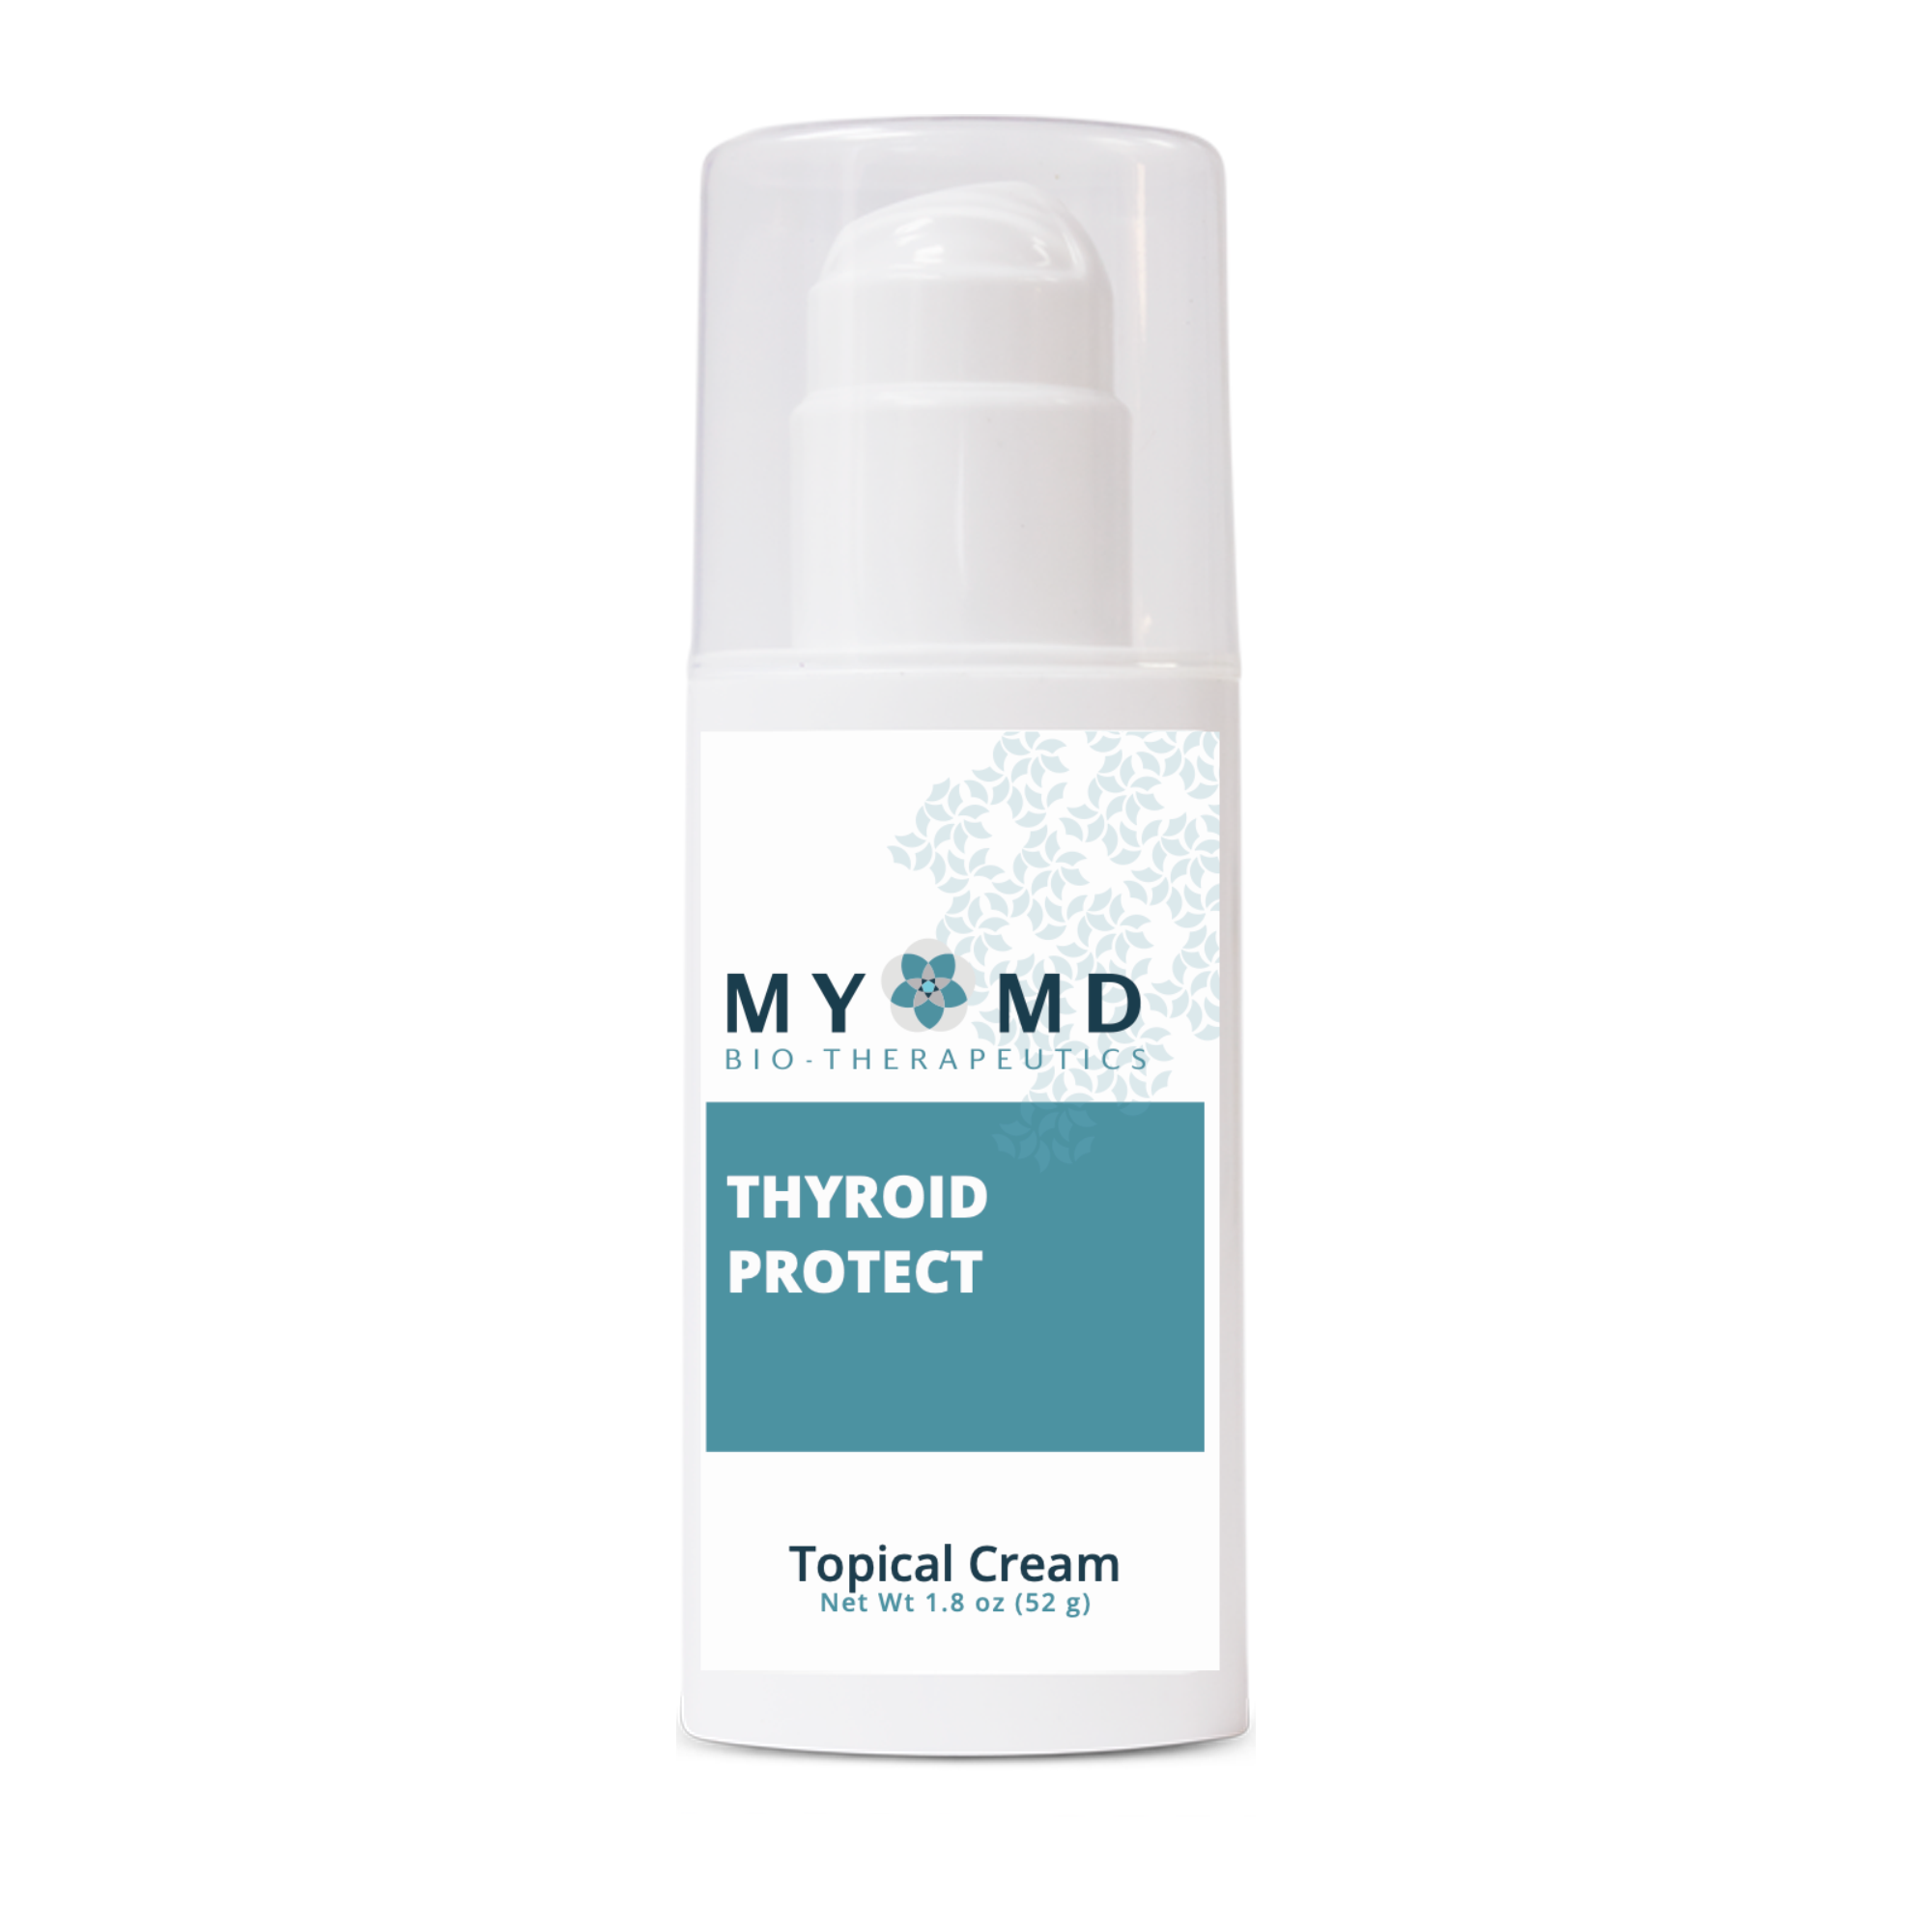 THYROID PROTECT